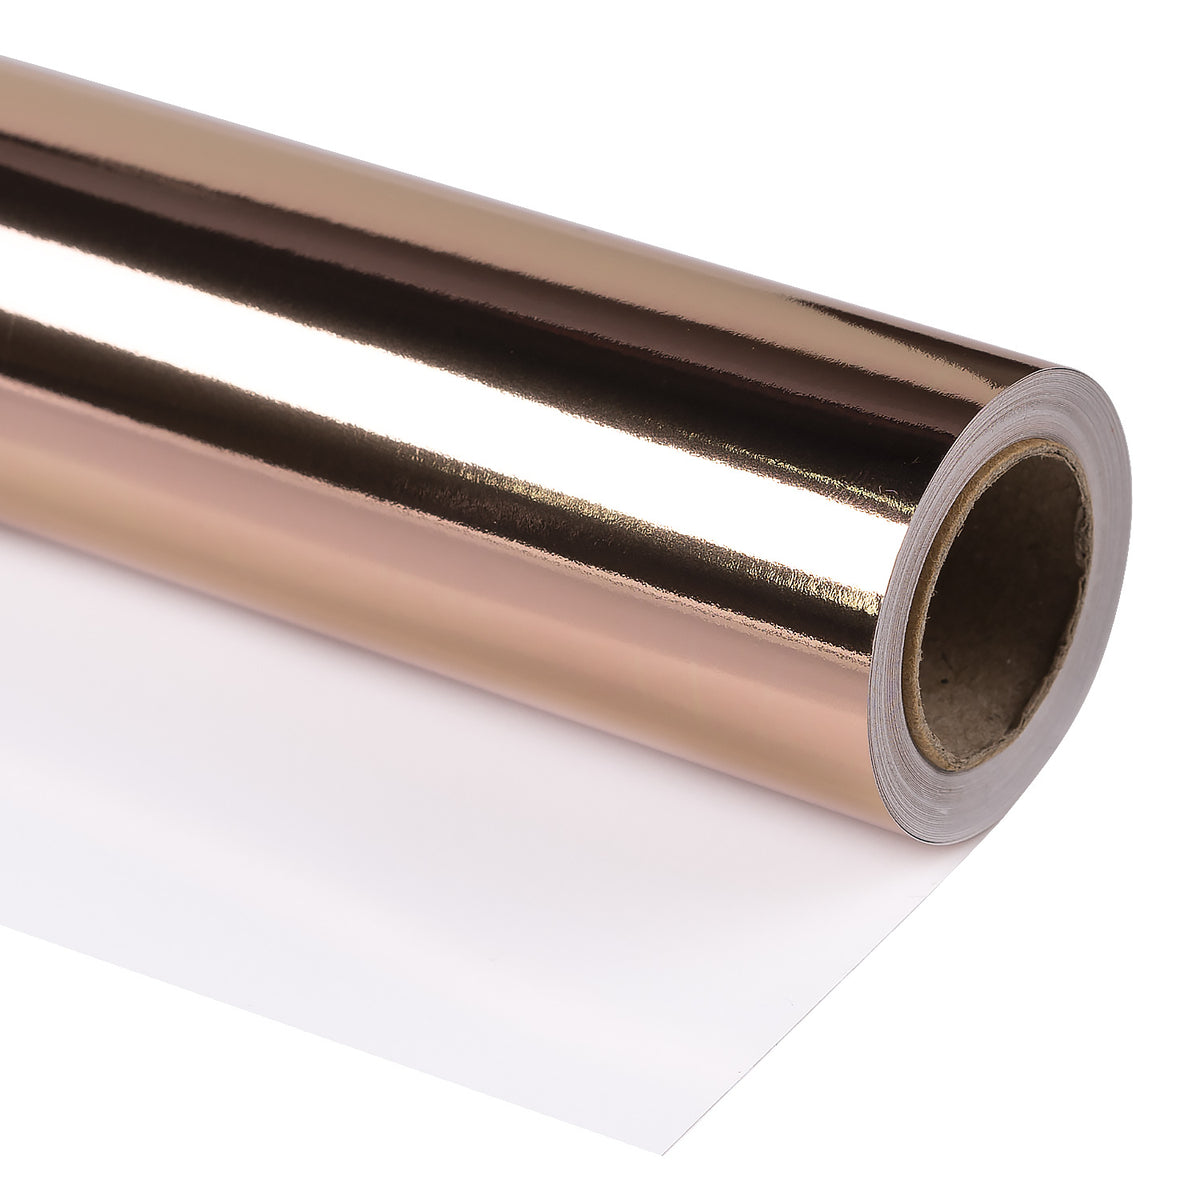 Celebrate Next Solid Metallic Rose Gold True Rose Gold Shinny Gloss  Metallic Gift Wrapping Paper Roll 30 x 15